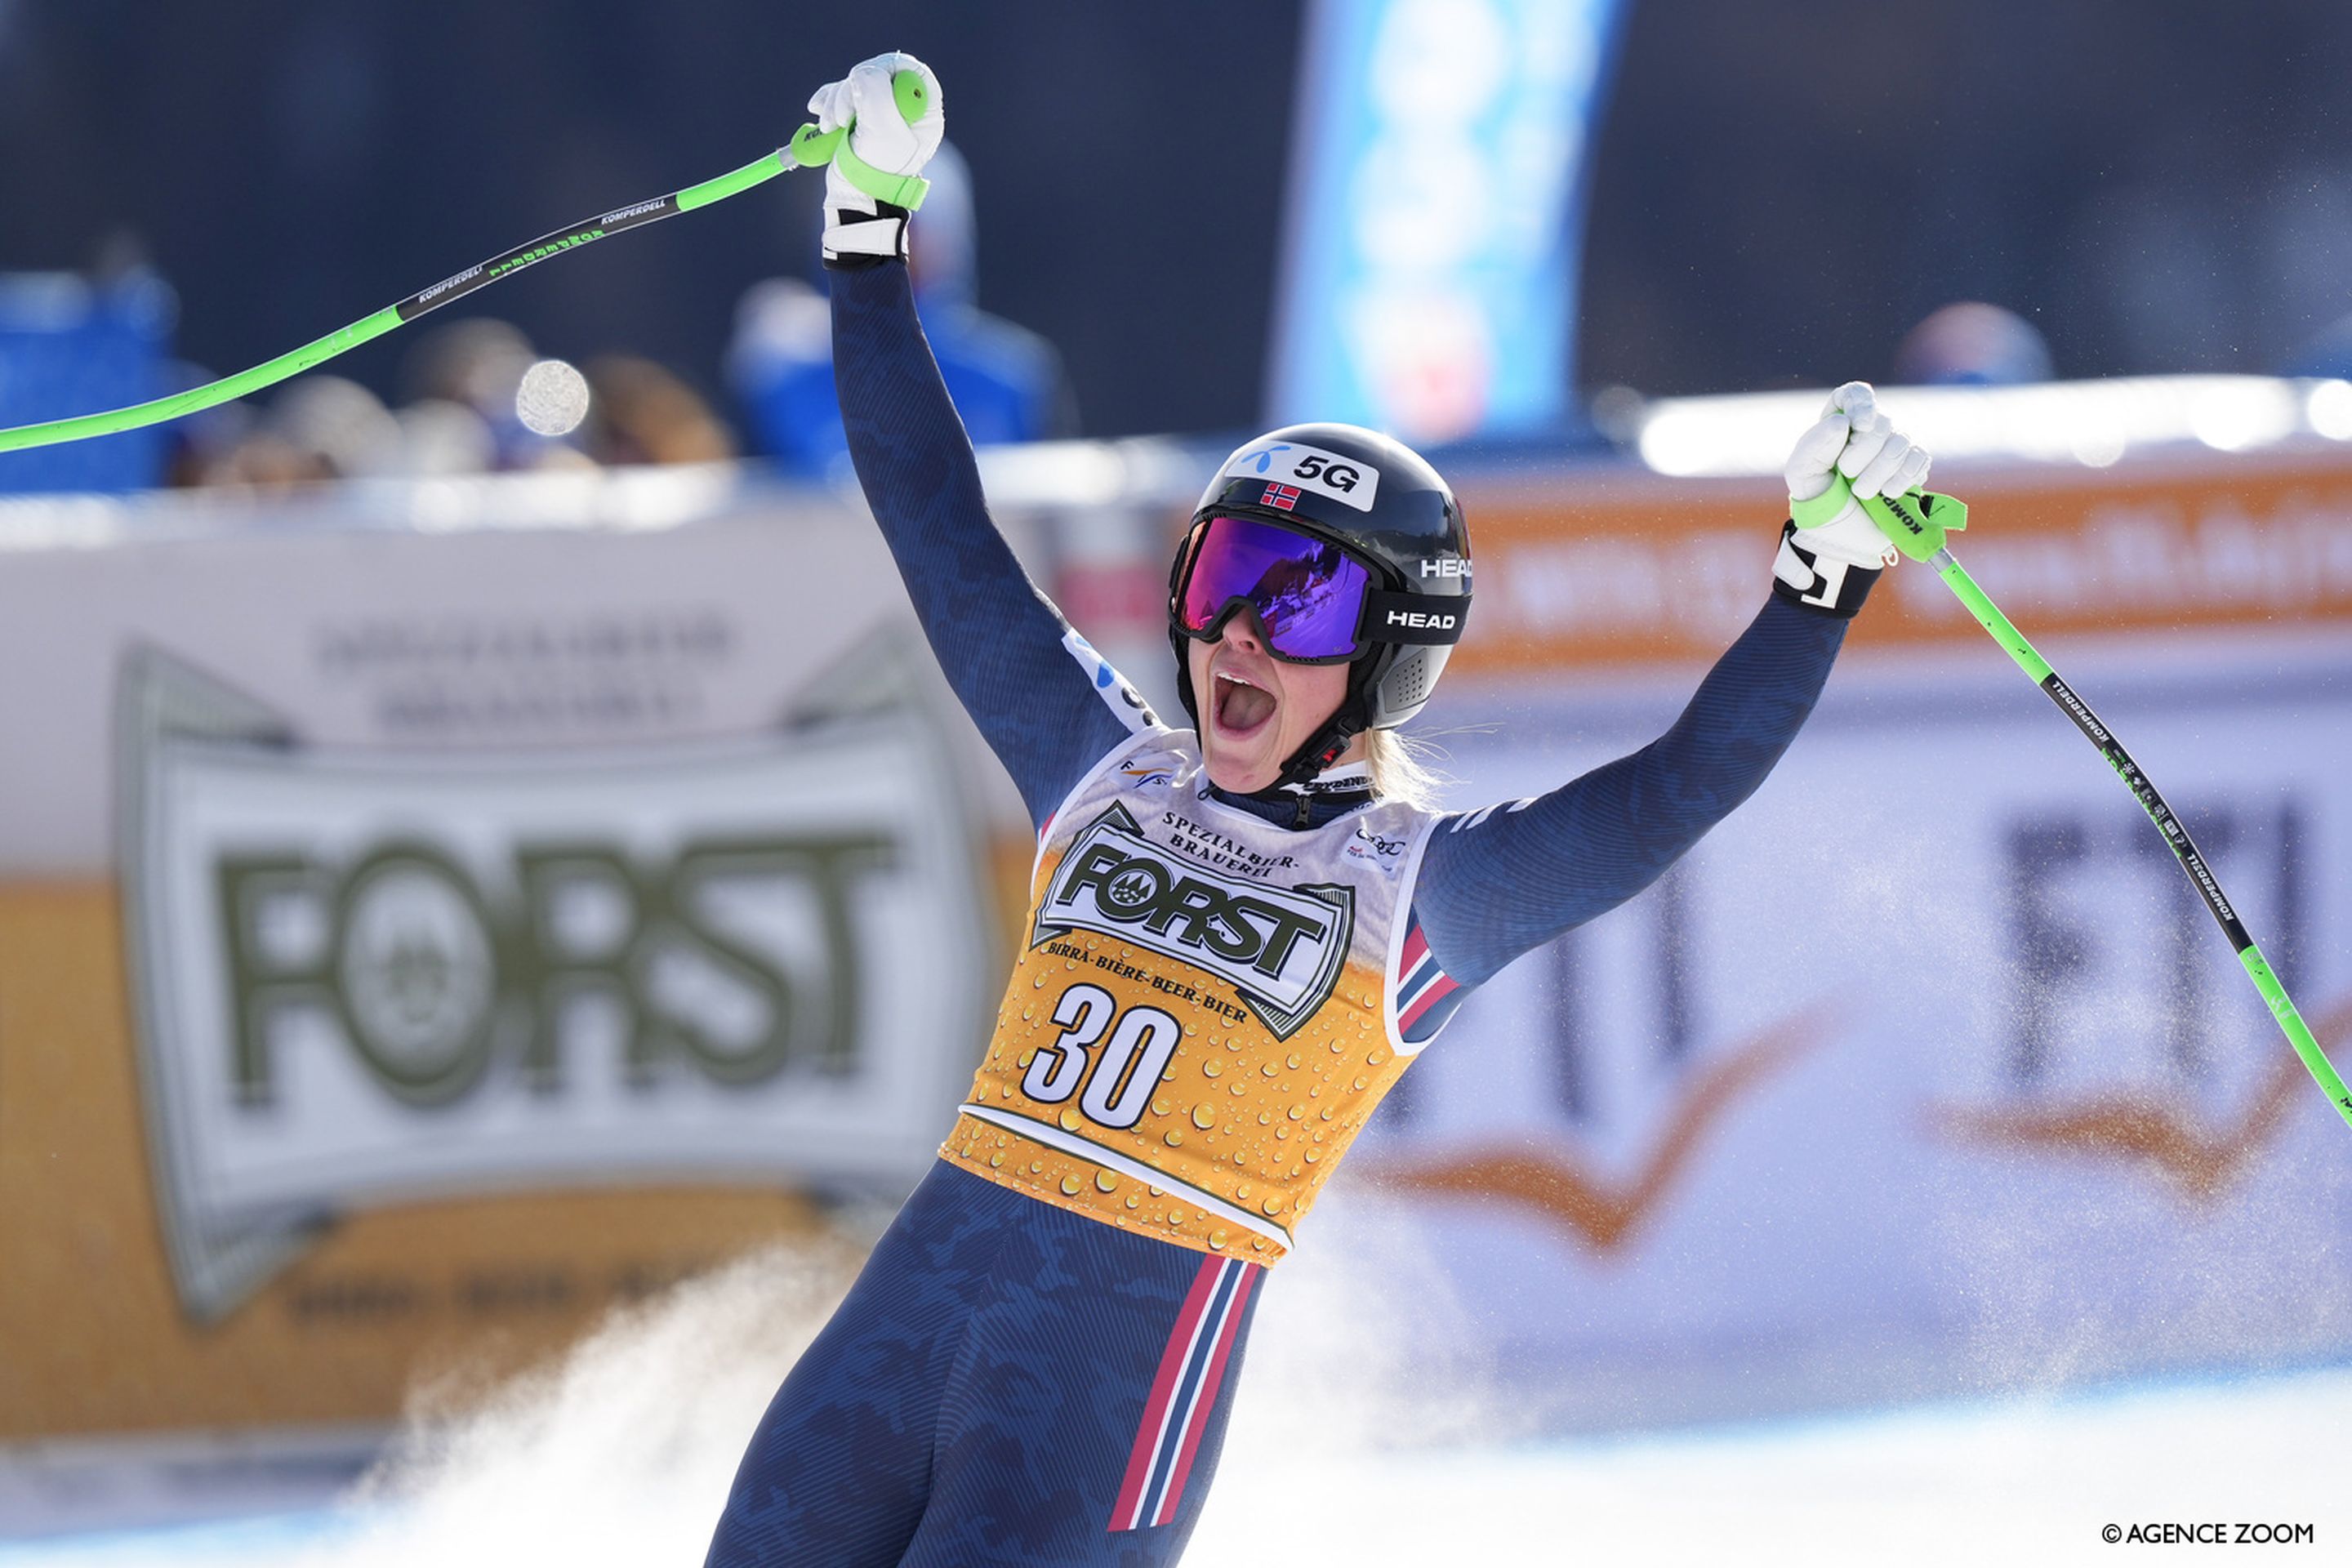 Lie celebrates after finishing second to reach a World Cup podium for the second time (Agence Zoom)